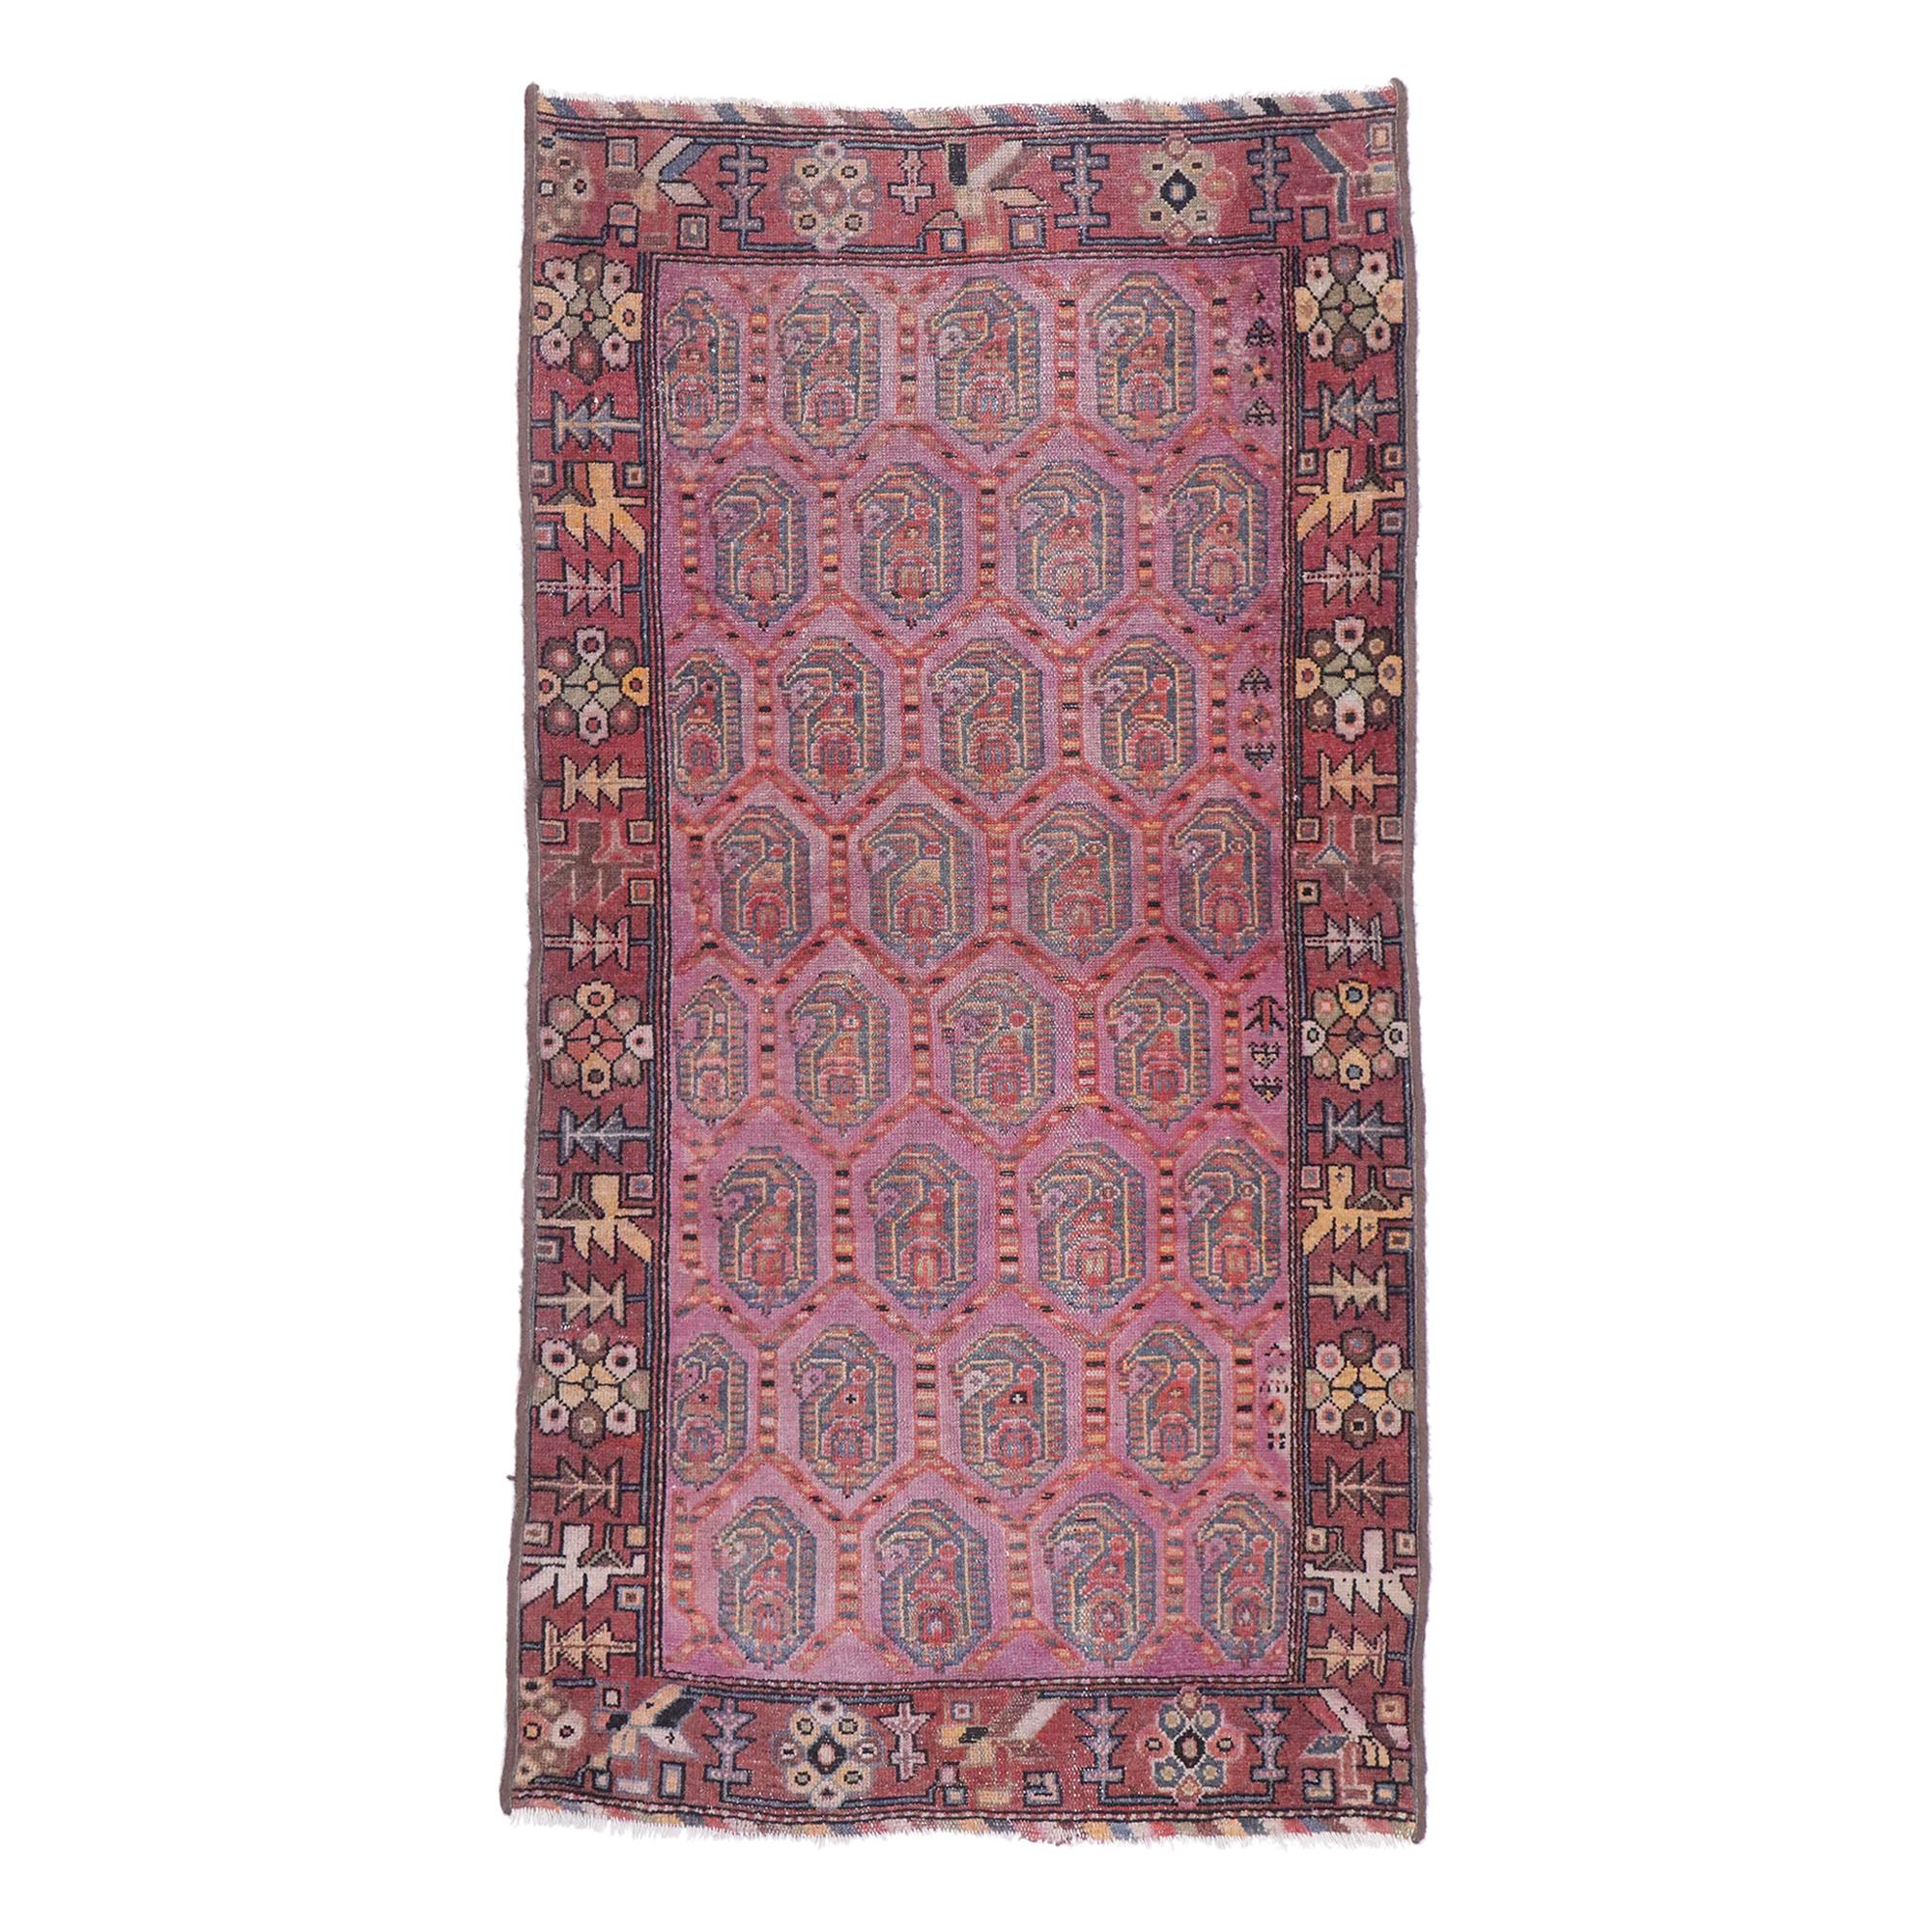 Antique Persian Malayer Rug with Rustic Tribal Bohemian Style